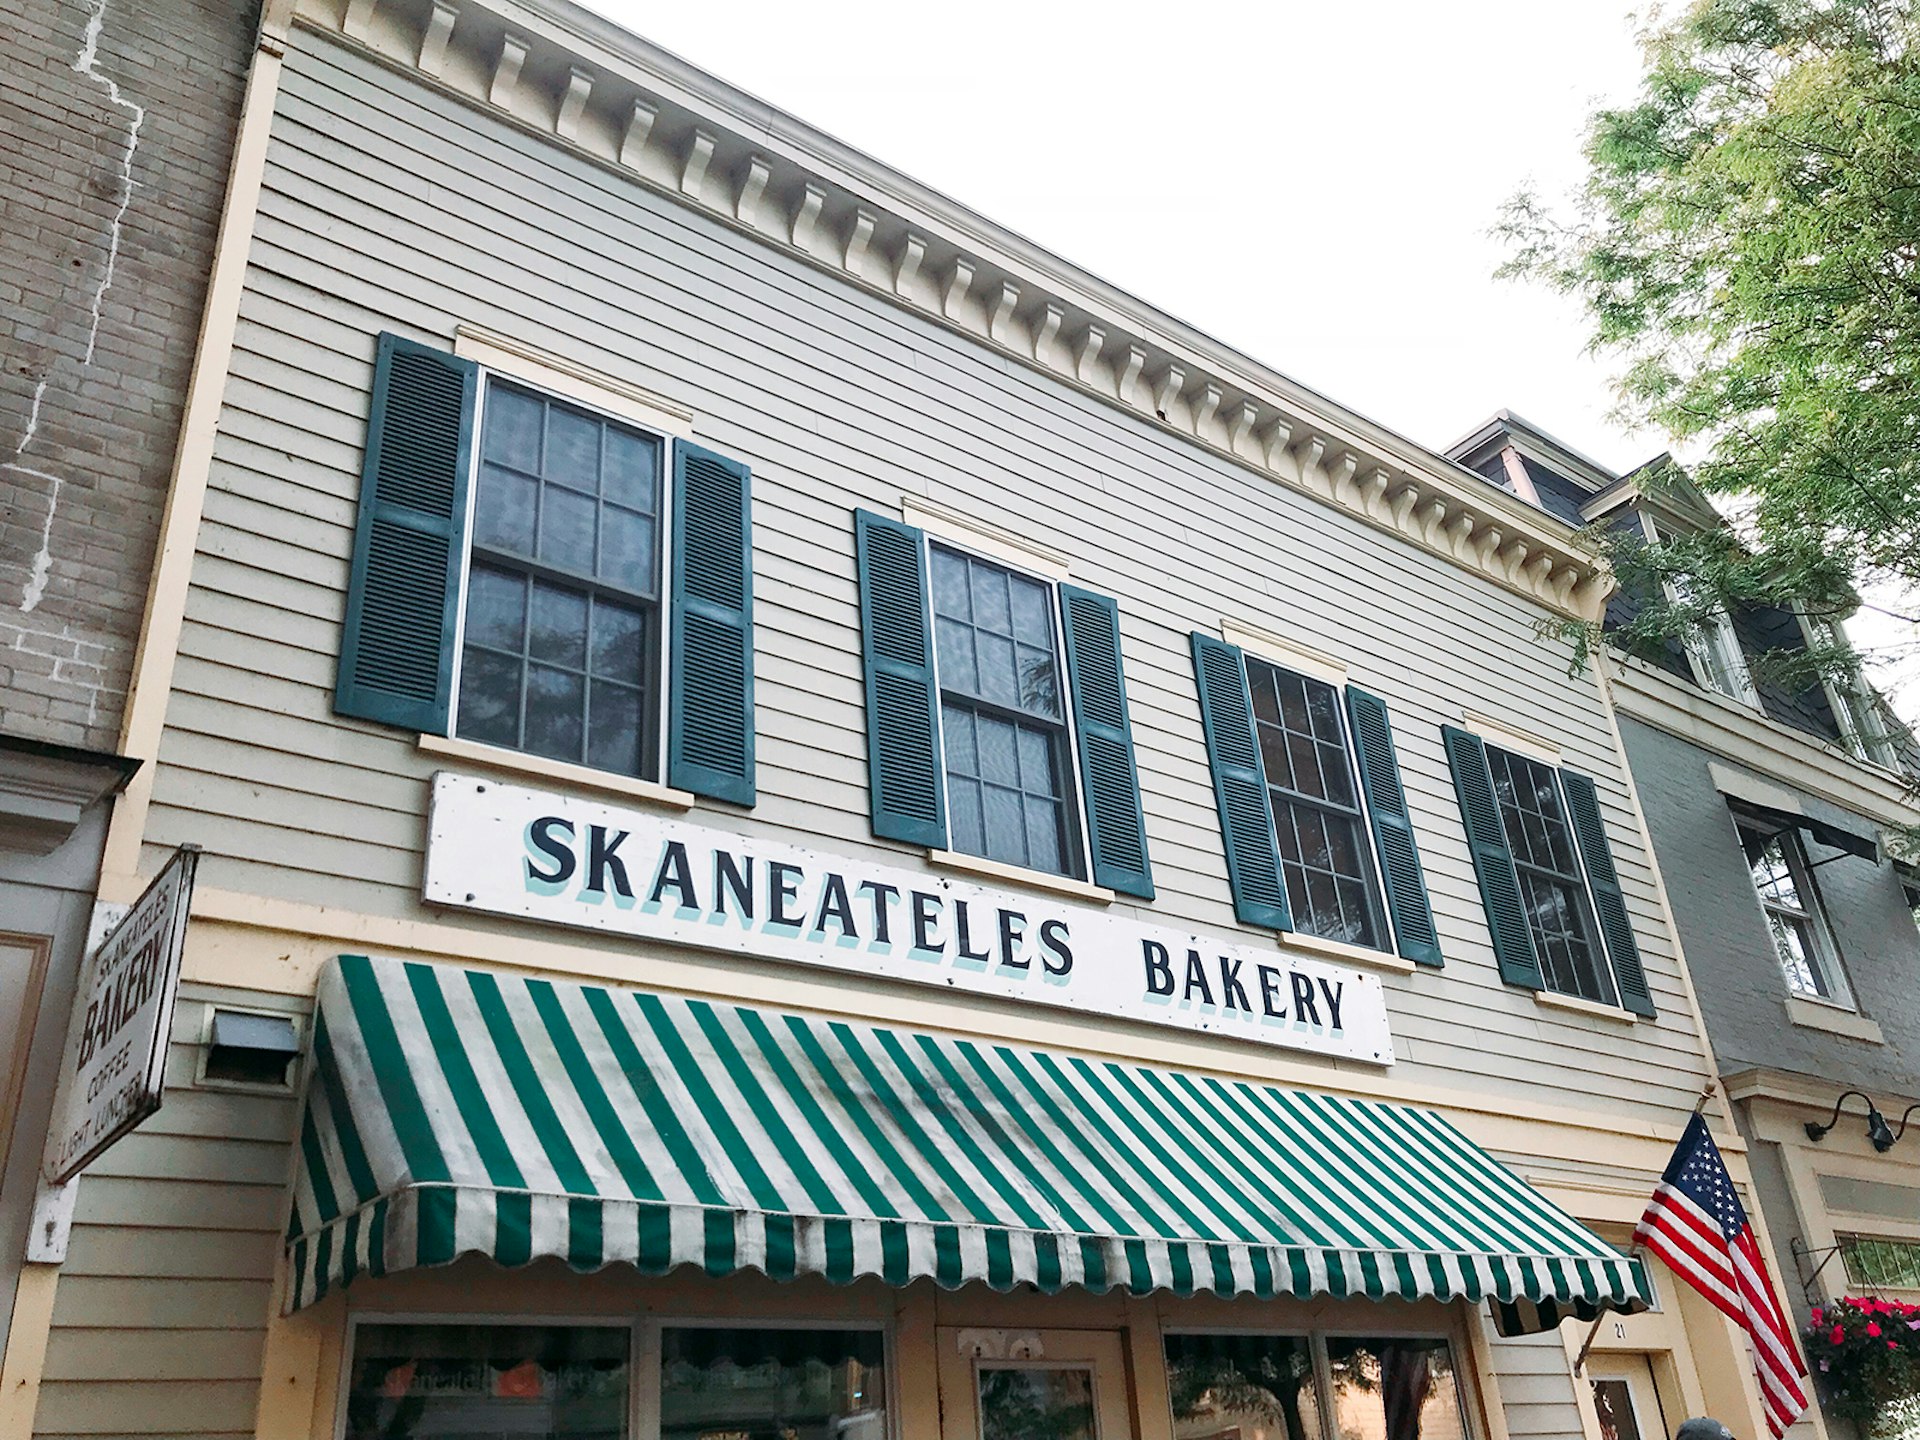 Close-up of facade of Skaneatles Bakery, a 19th-century building with green shutters and a green-and-white striped awning © Mikki Brammer / Lonely Planet